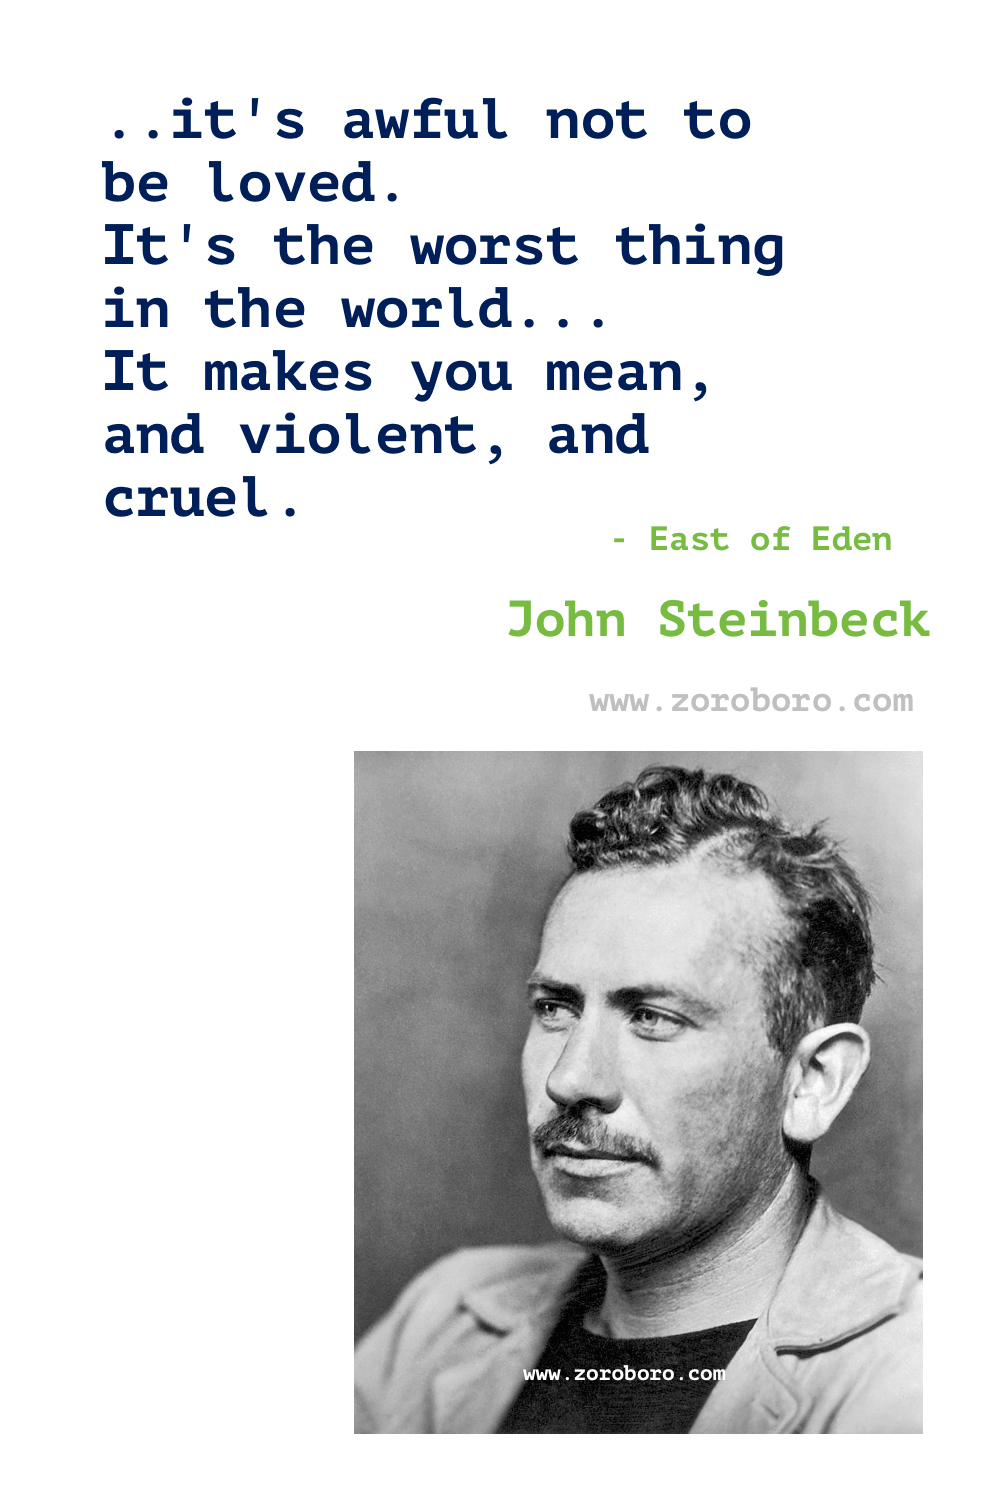 John Steinbeck Quotes. John Steinbeck East of Eden Book Quotes. The Grapes of Wrath Quotes. John Steinbeck Writing Quotes. John Steinbeck Books Quotes.